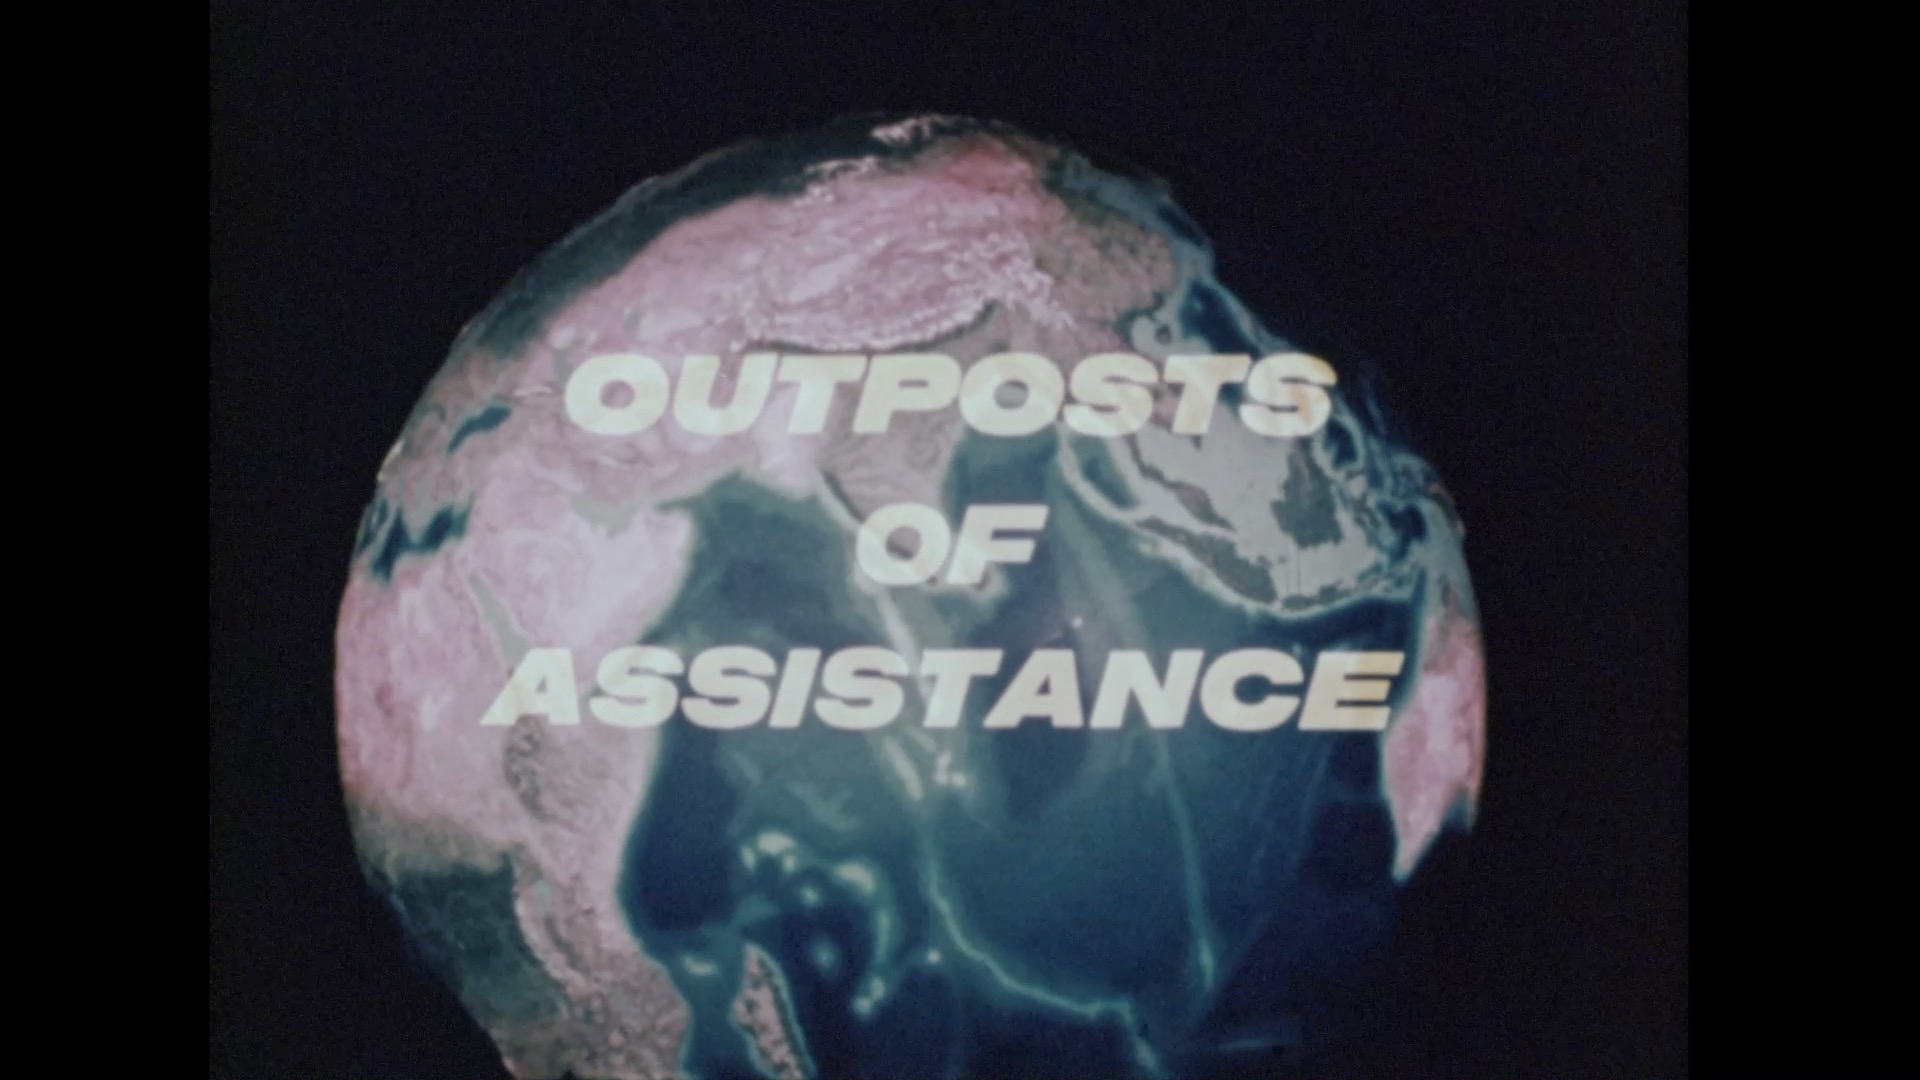 Outposts of Assistance, 1972